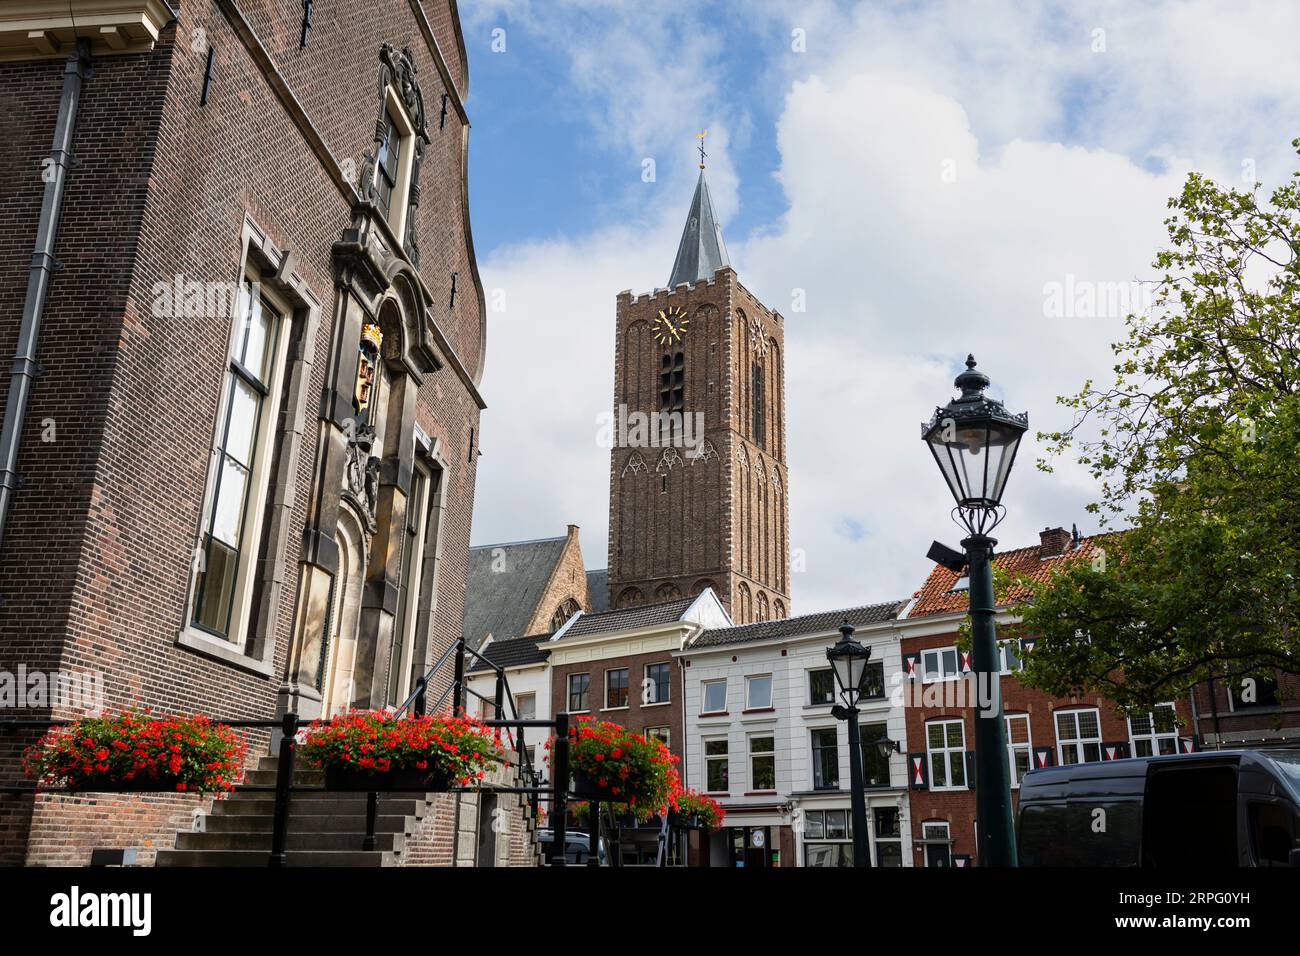 City scape of Schiedam with the town hall and church tower Stock Photo